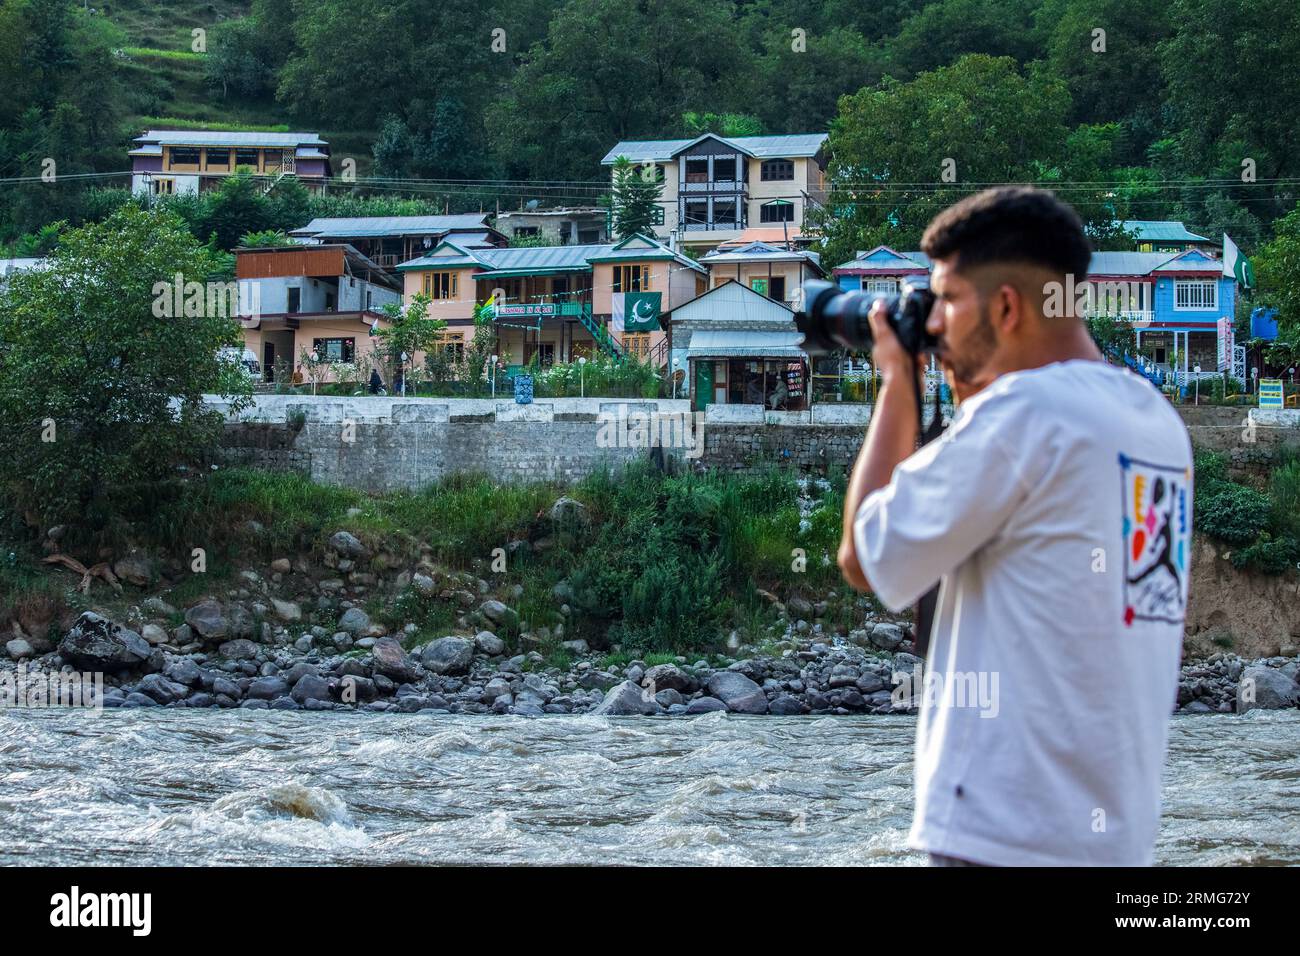 Keran Kupwara, India. 24th Aug, 2023. A Photographer takes photos towards Pakistan Administered Kashmir on the banks of Neelam river or Kishan Ganga that has divided Kashmir into two parts controlled by nuclear rivals India and Pakistan. The river acts as a disputed line of control and flows through a village called Keran from both sides which is located on the northern side of Indian Kashmir's Border district Kupwara some 150kms from Srinagar and 93kms from Muzaffarabad, in the Pakistan side of Kashmir. (Photo by Faisal Bashir/SOPA Images/Sipa USA) Credit: Sipa USA/Alamy Live News Stock Photo